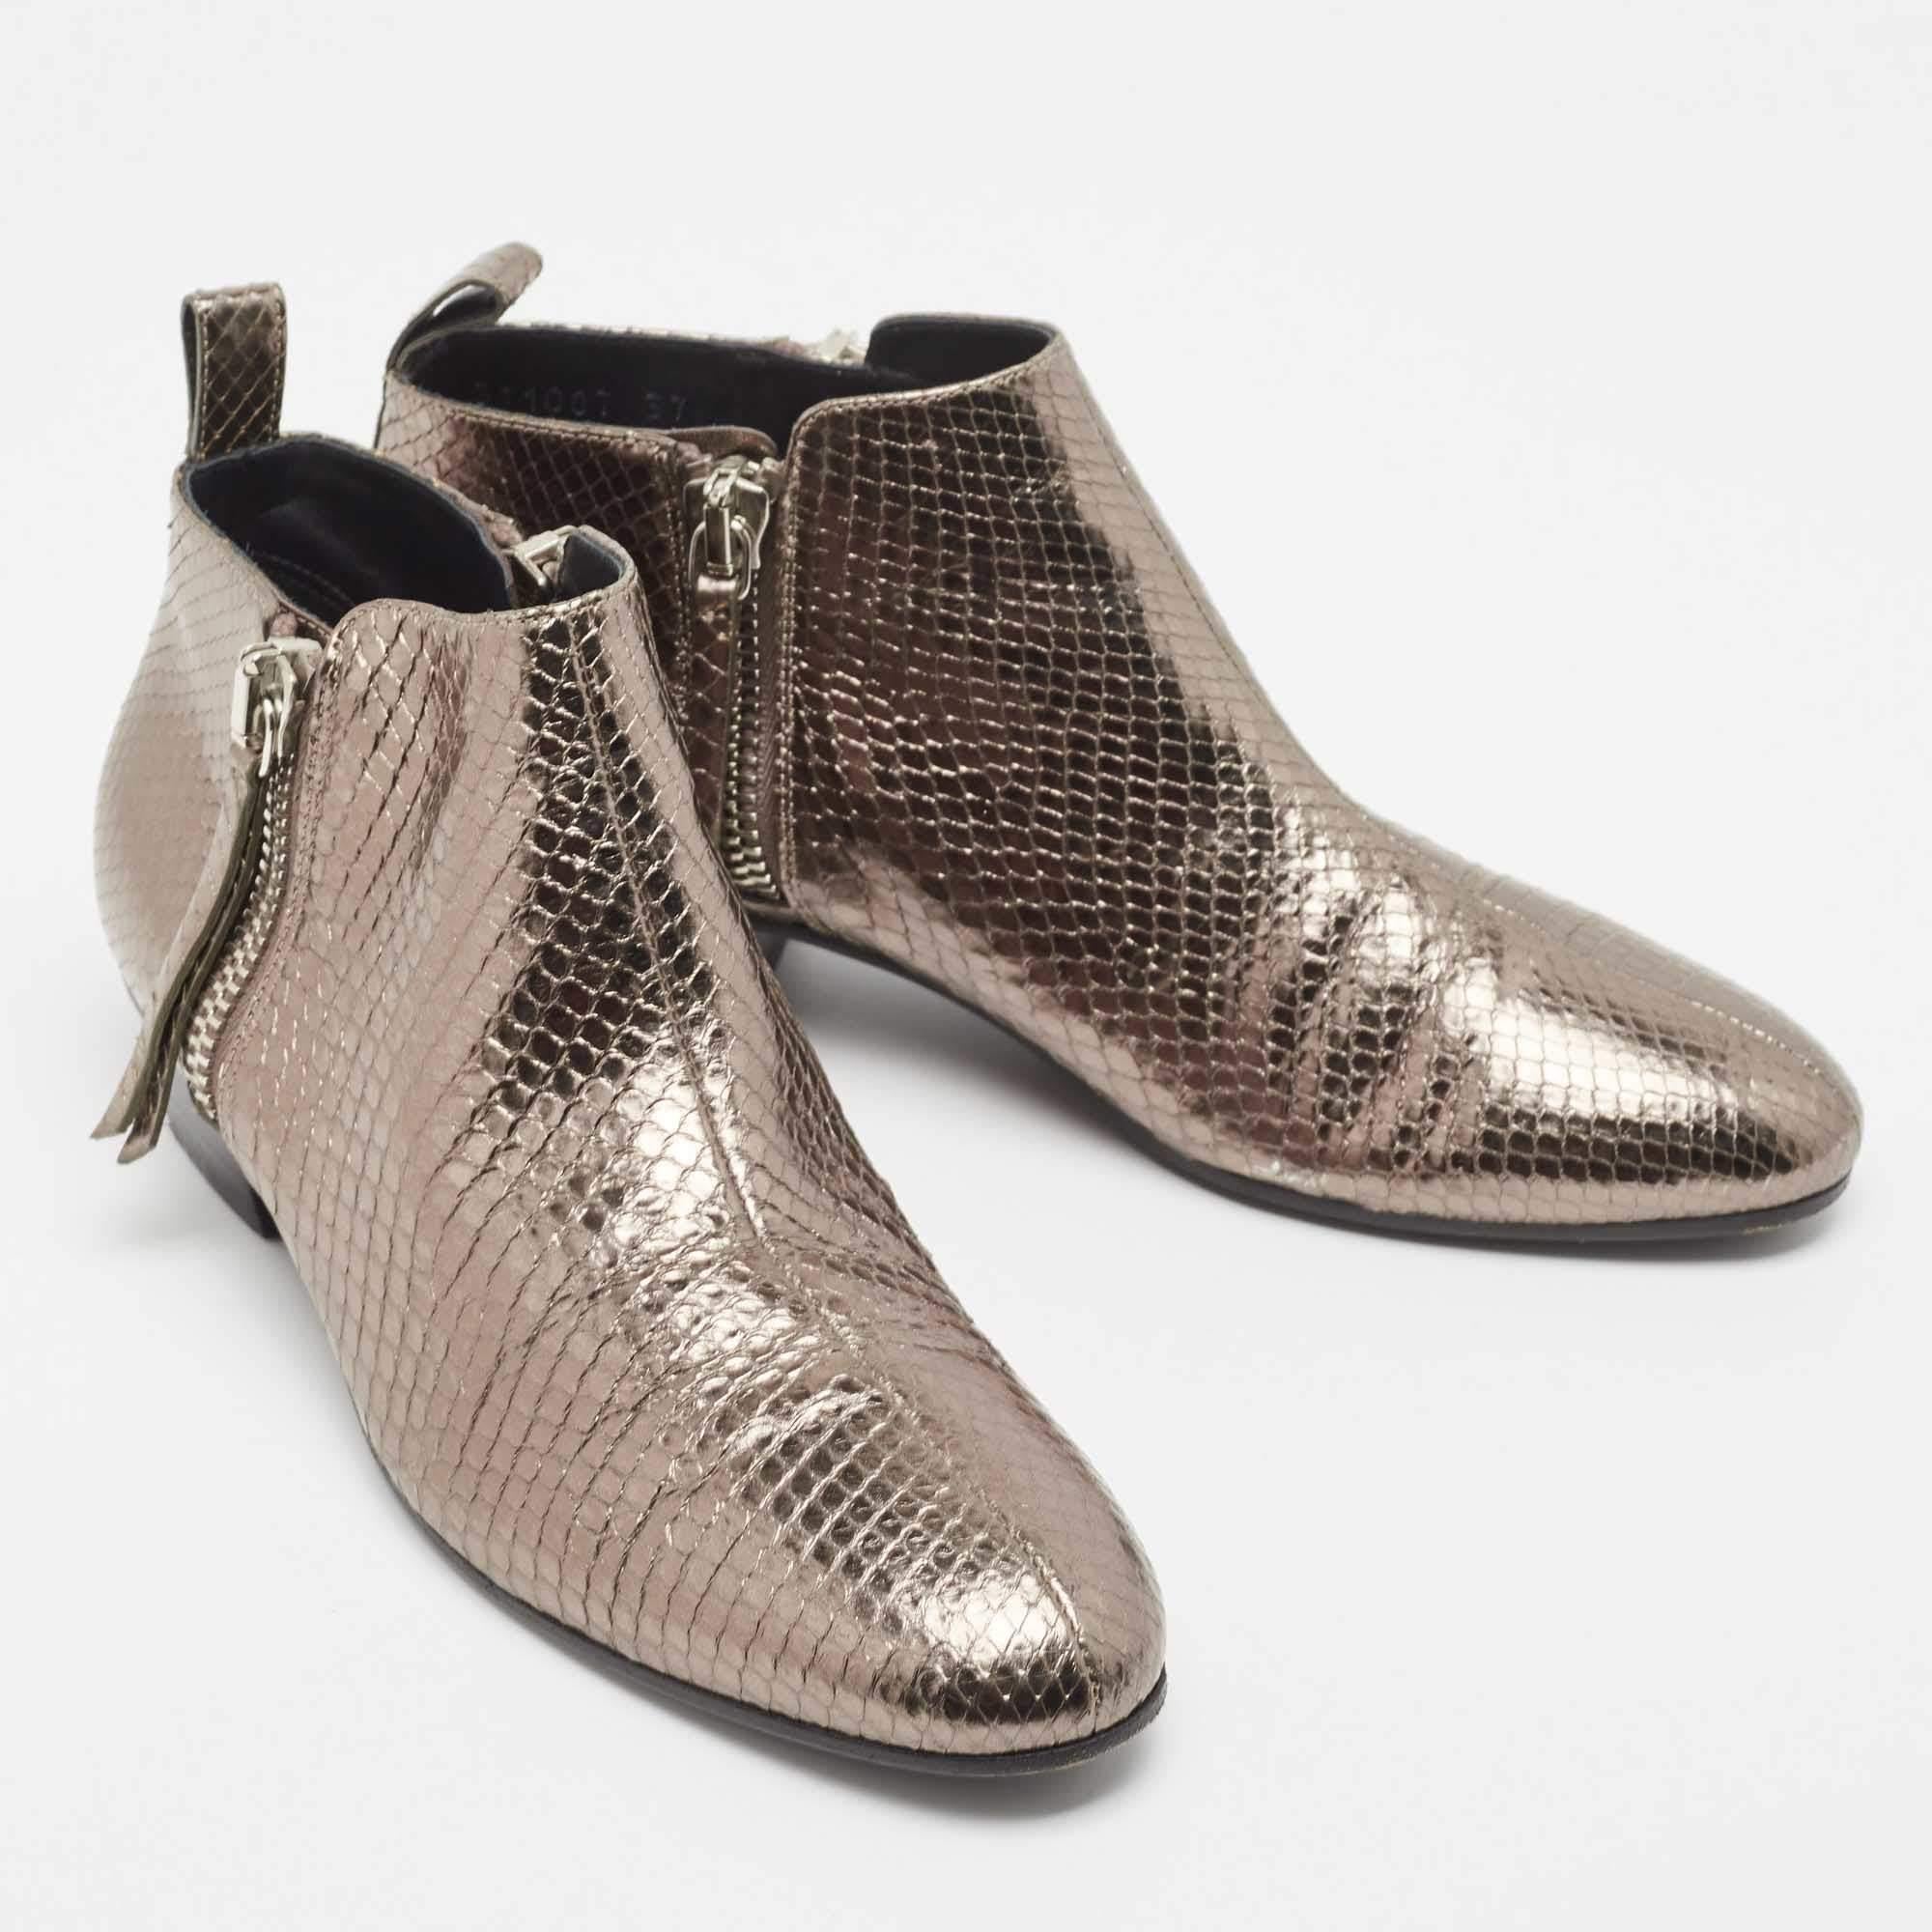  Gucci Metallic Embossed Python Ankle Boots Size 37 For Sale 1